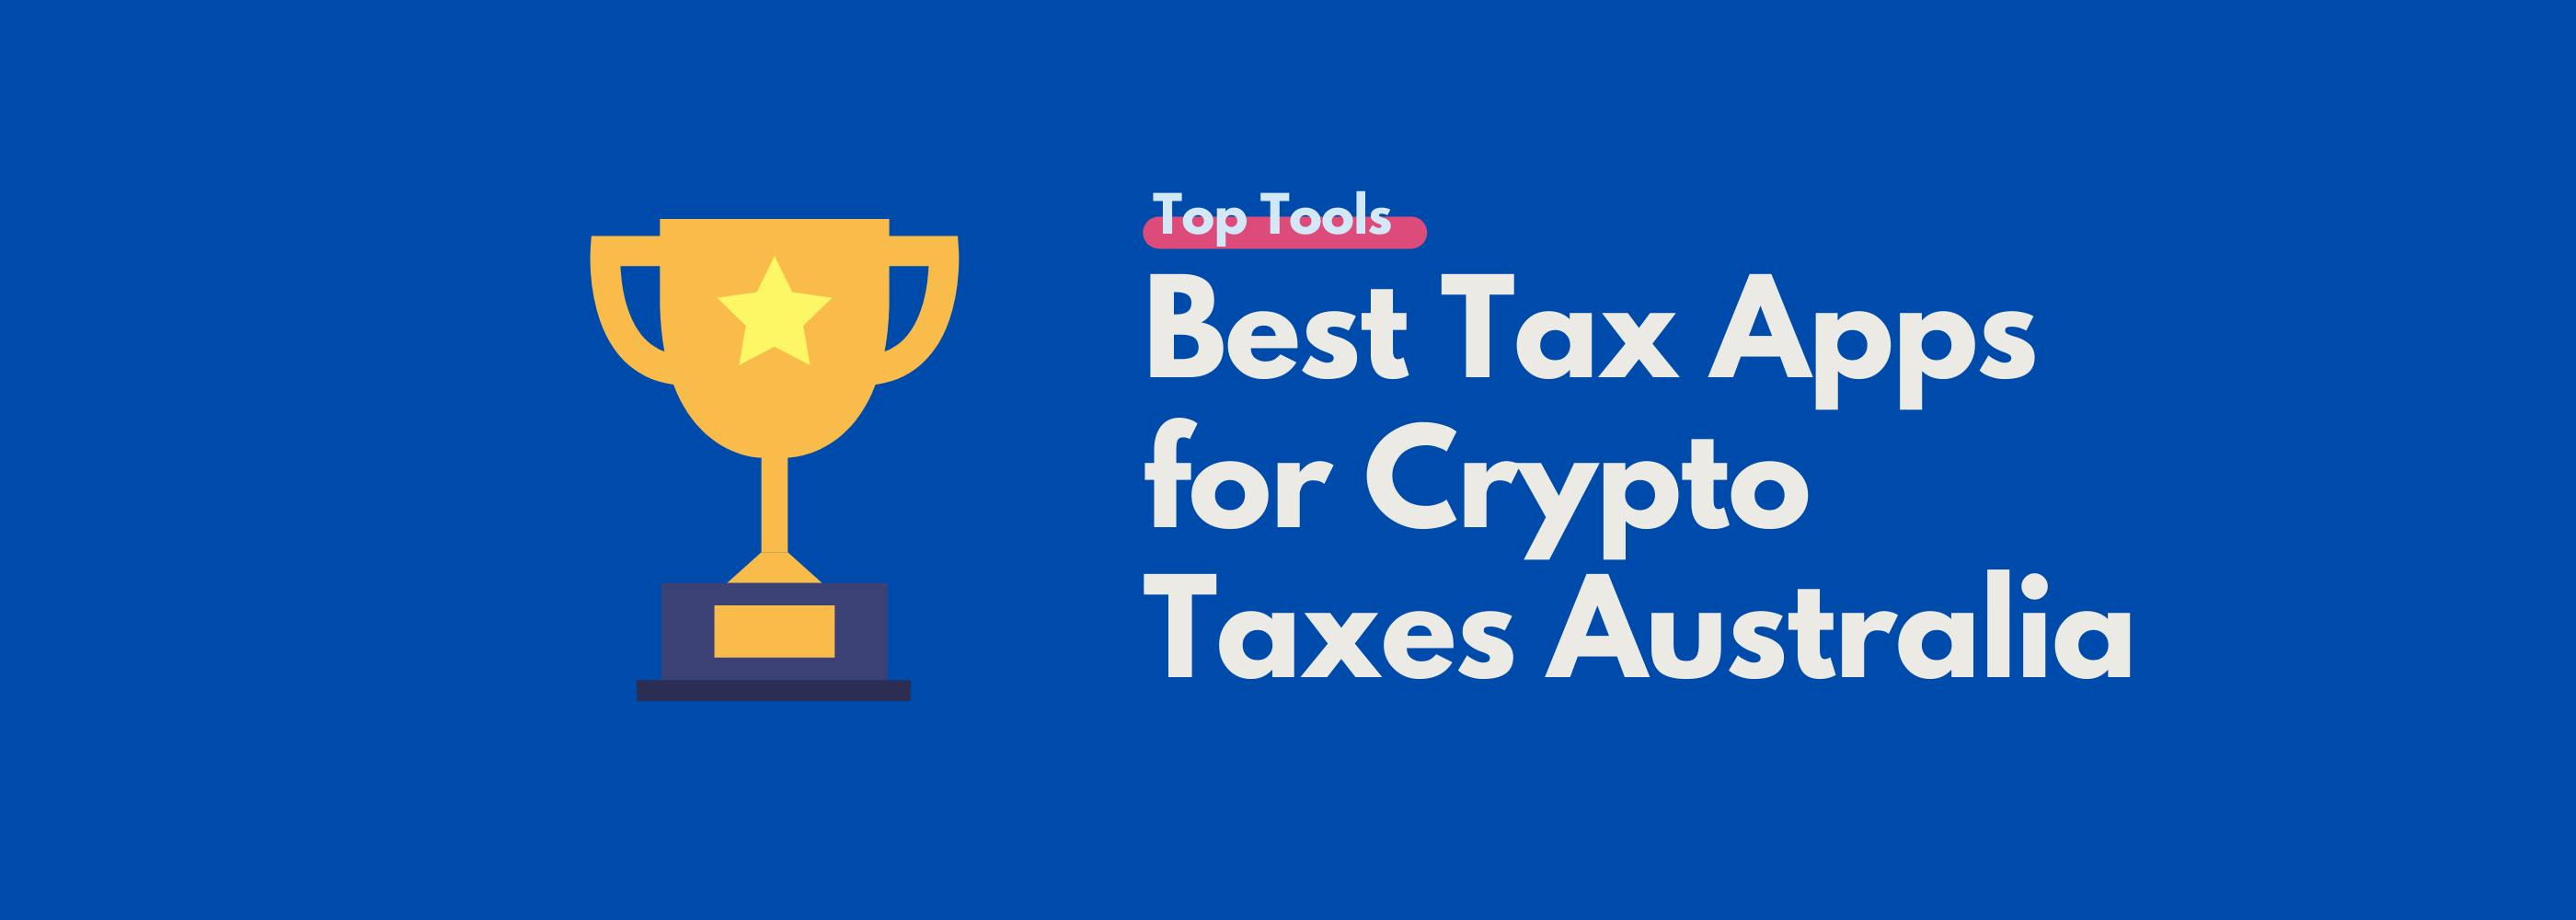 Guide to Best Tax Software for Crypto Tax Australia